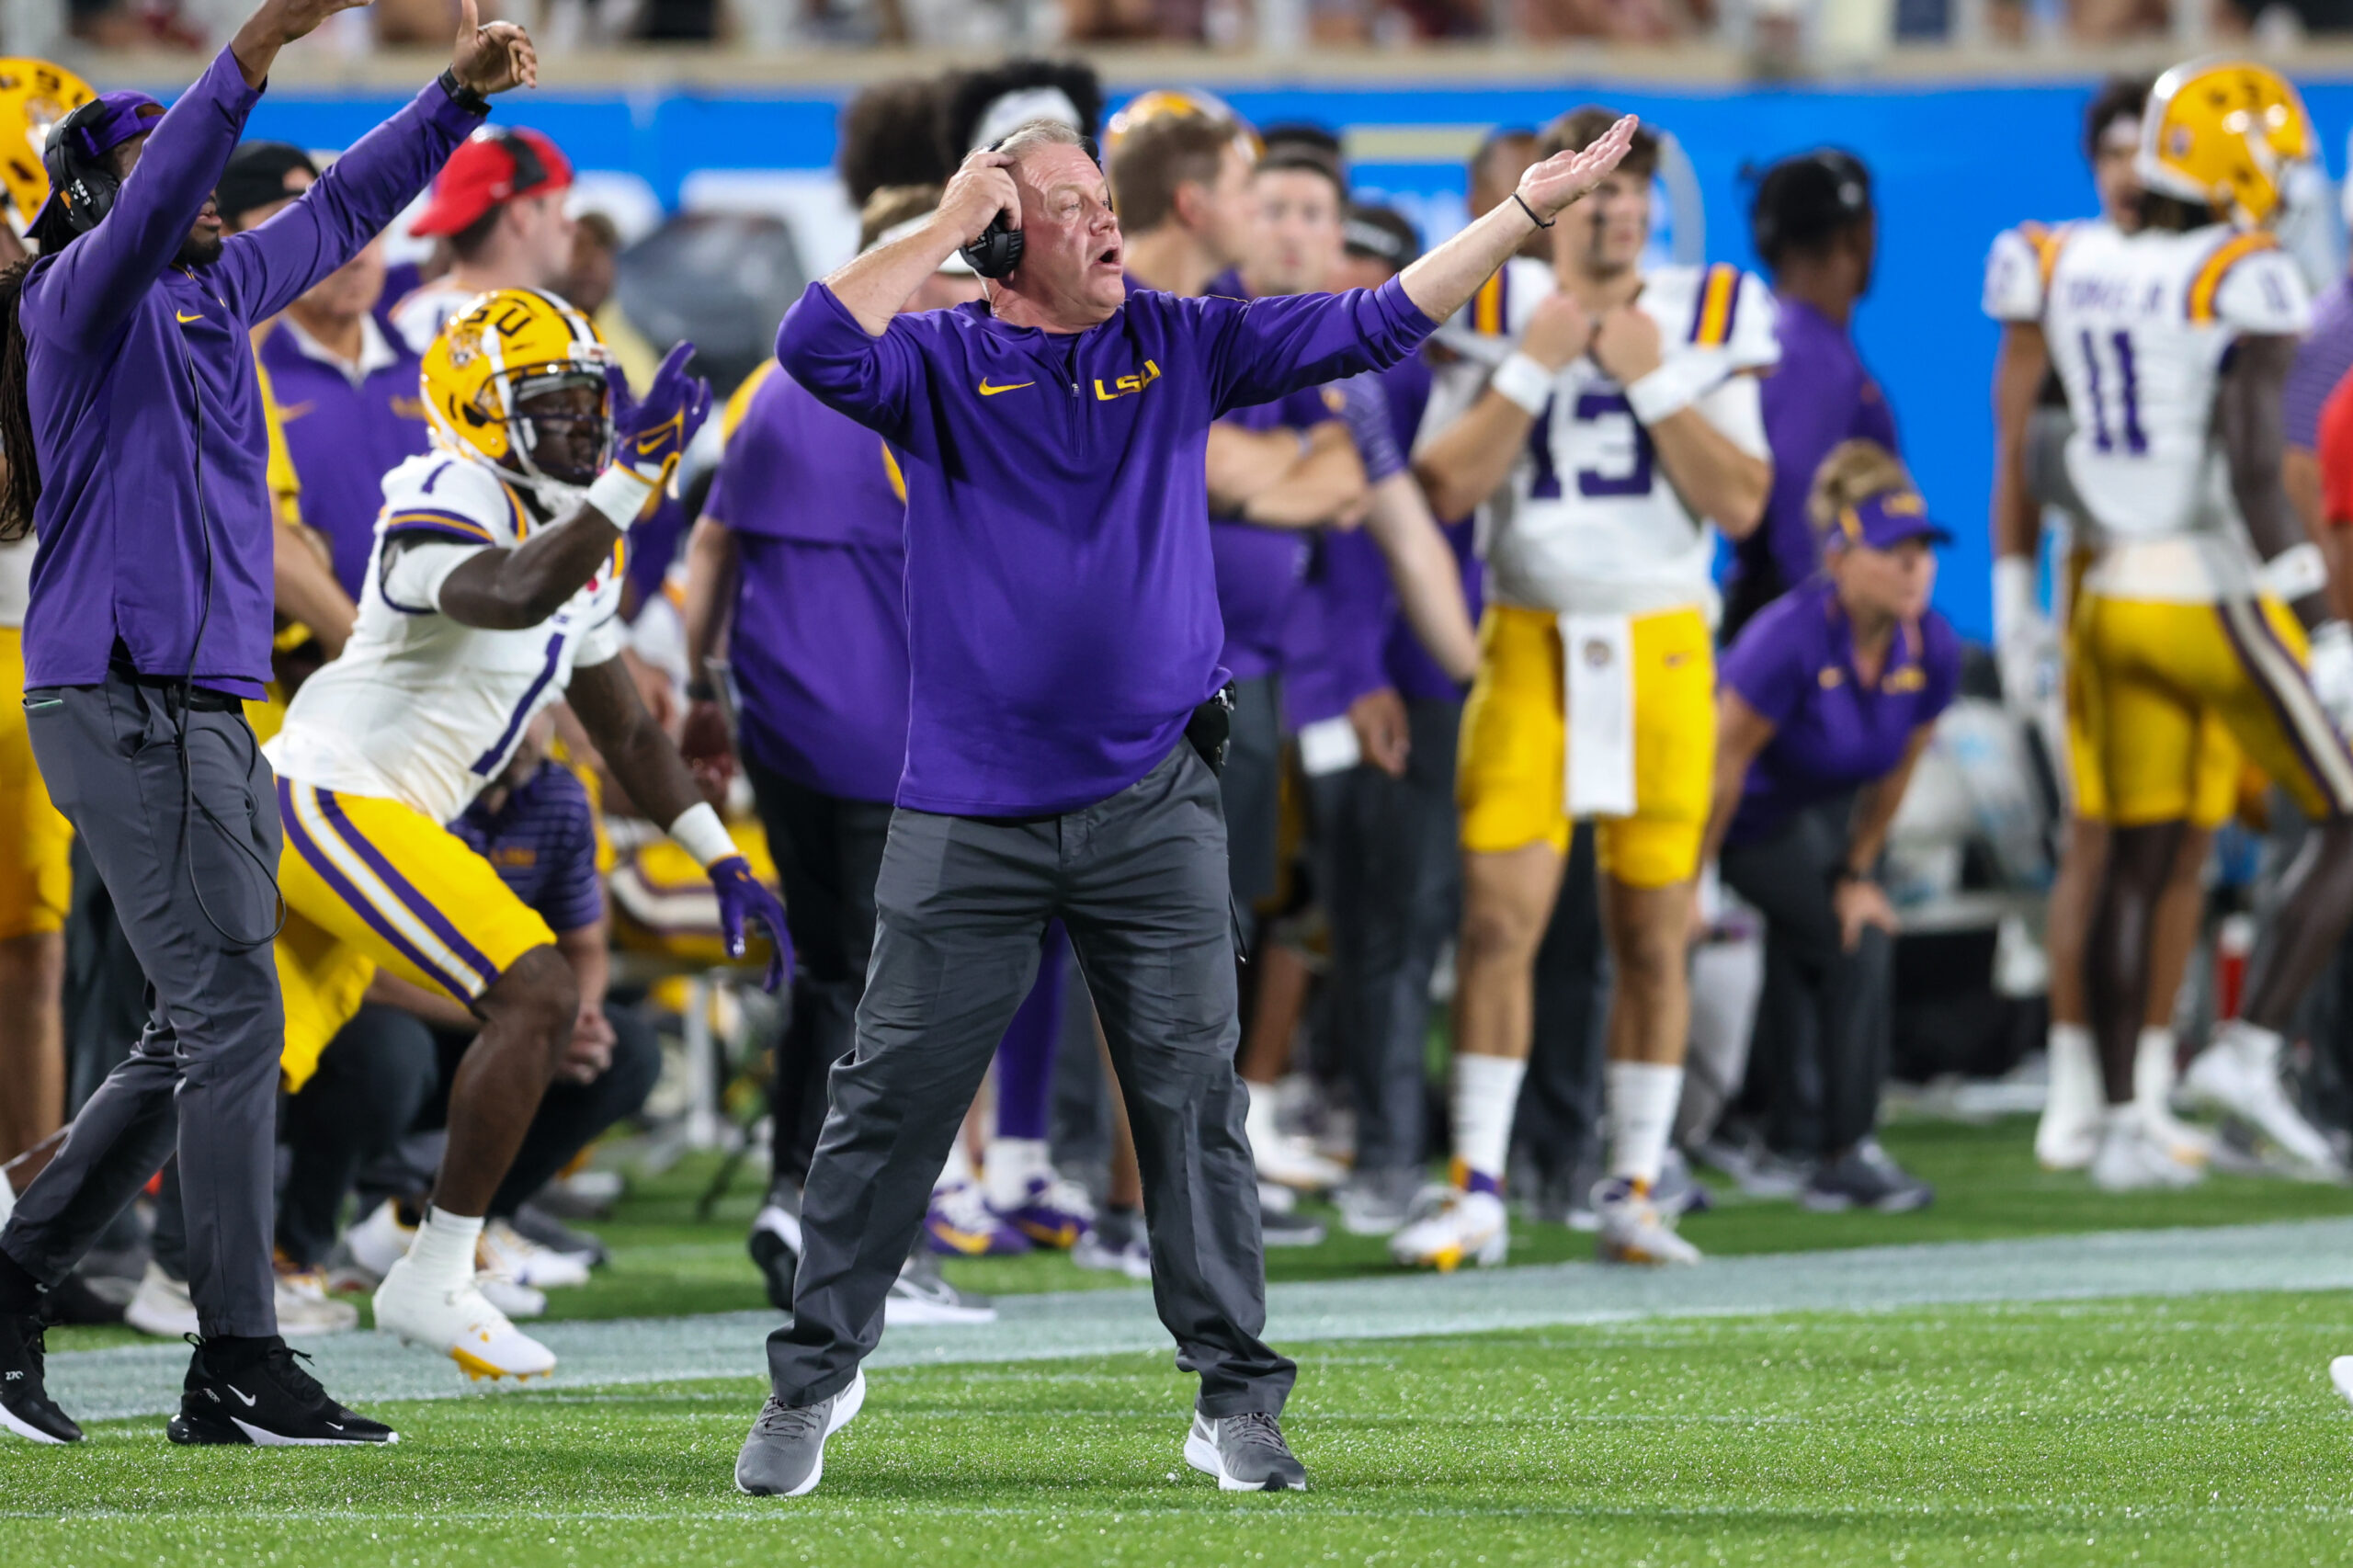 Breaking: LSU adds another Spring Transfer in Louisiana